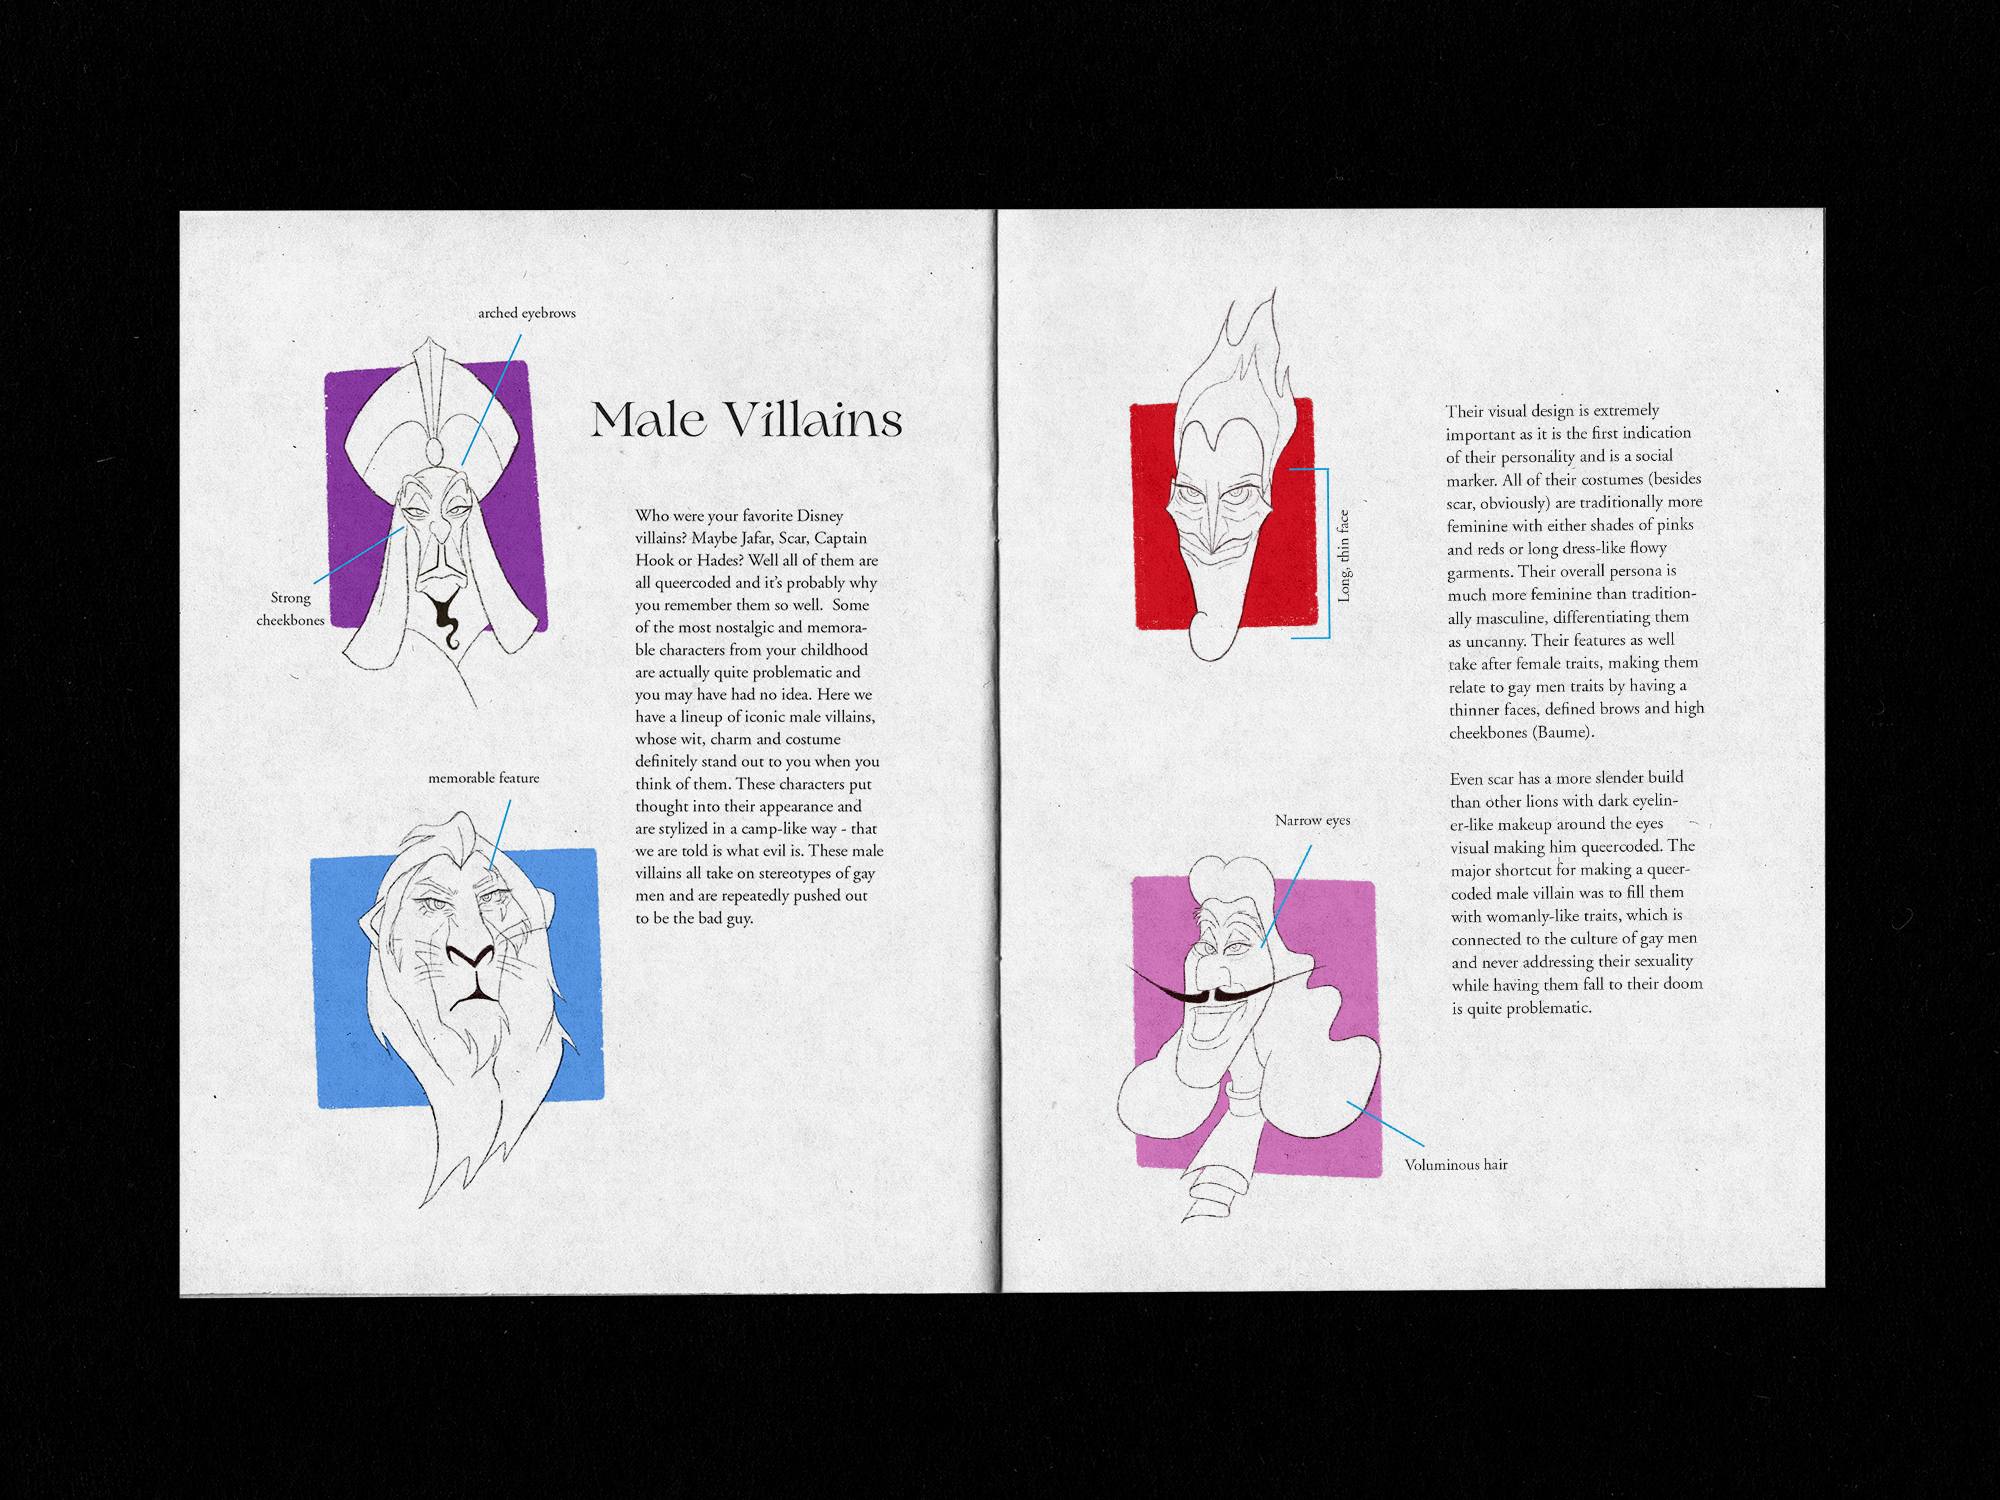 A spread from the 'How to Draw Villains the Queer Way' zine, showcasing how Disney queercodes male villains in their design